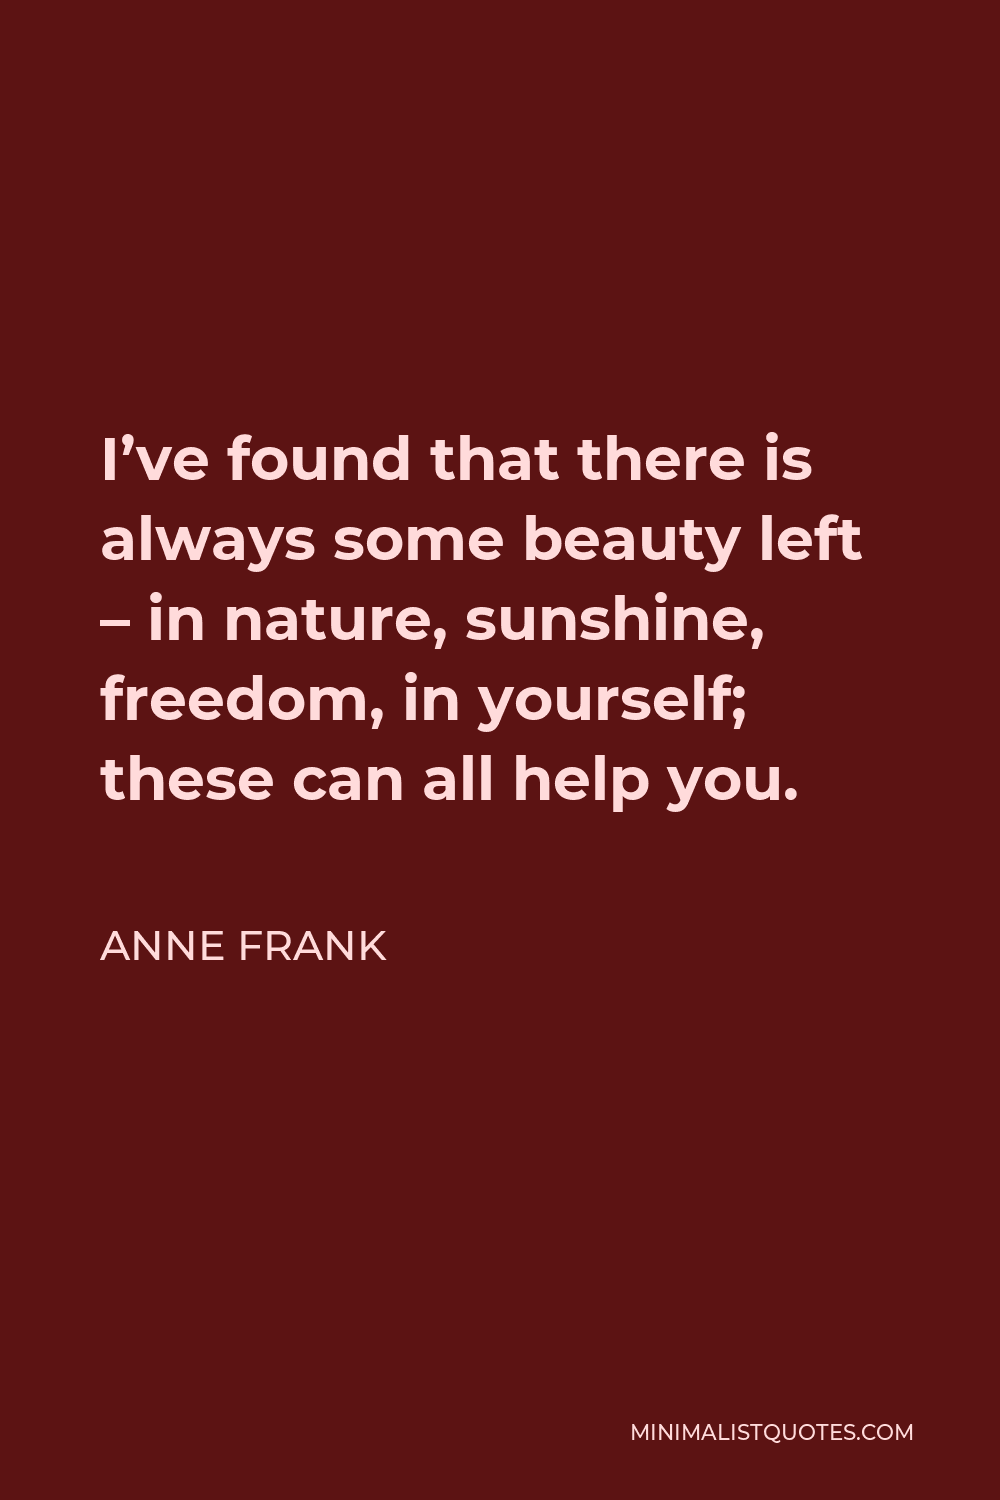 Anne Frank Quote - I’ve found that there is always some beauty left – in nature, sunshine, freedom, in yourself; these can all help you.